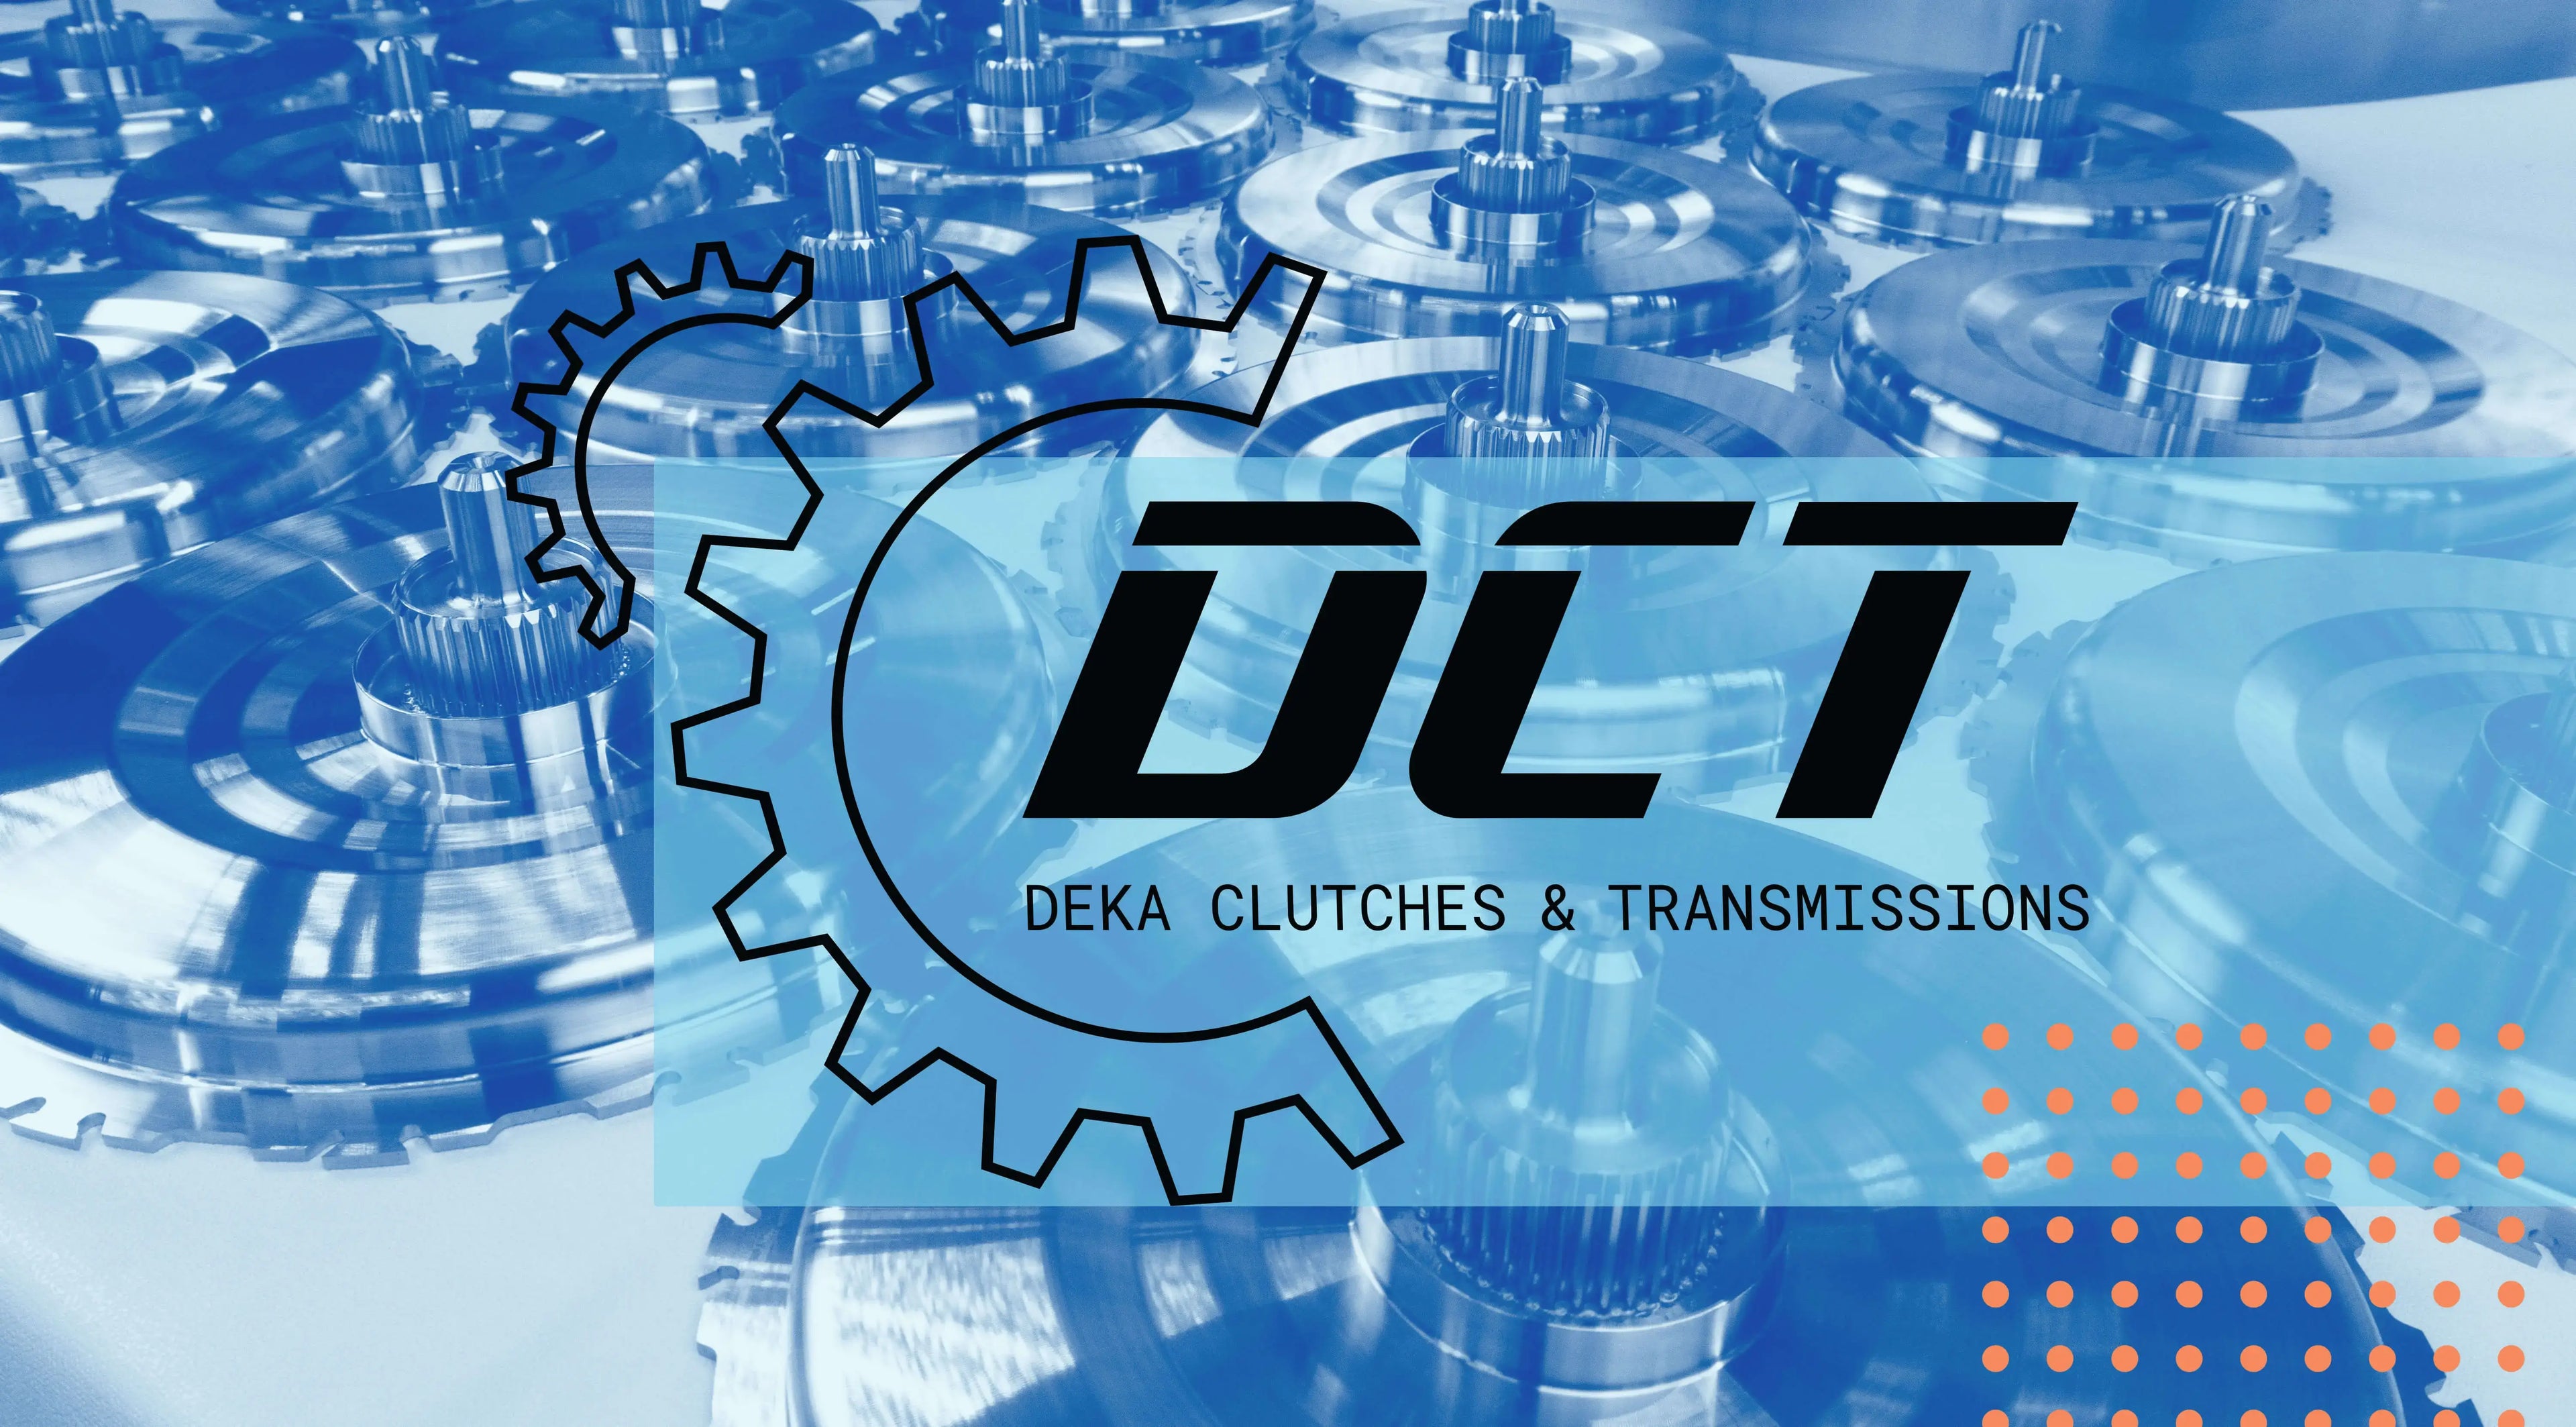 DEKA Competition Clutches & Transmissions